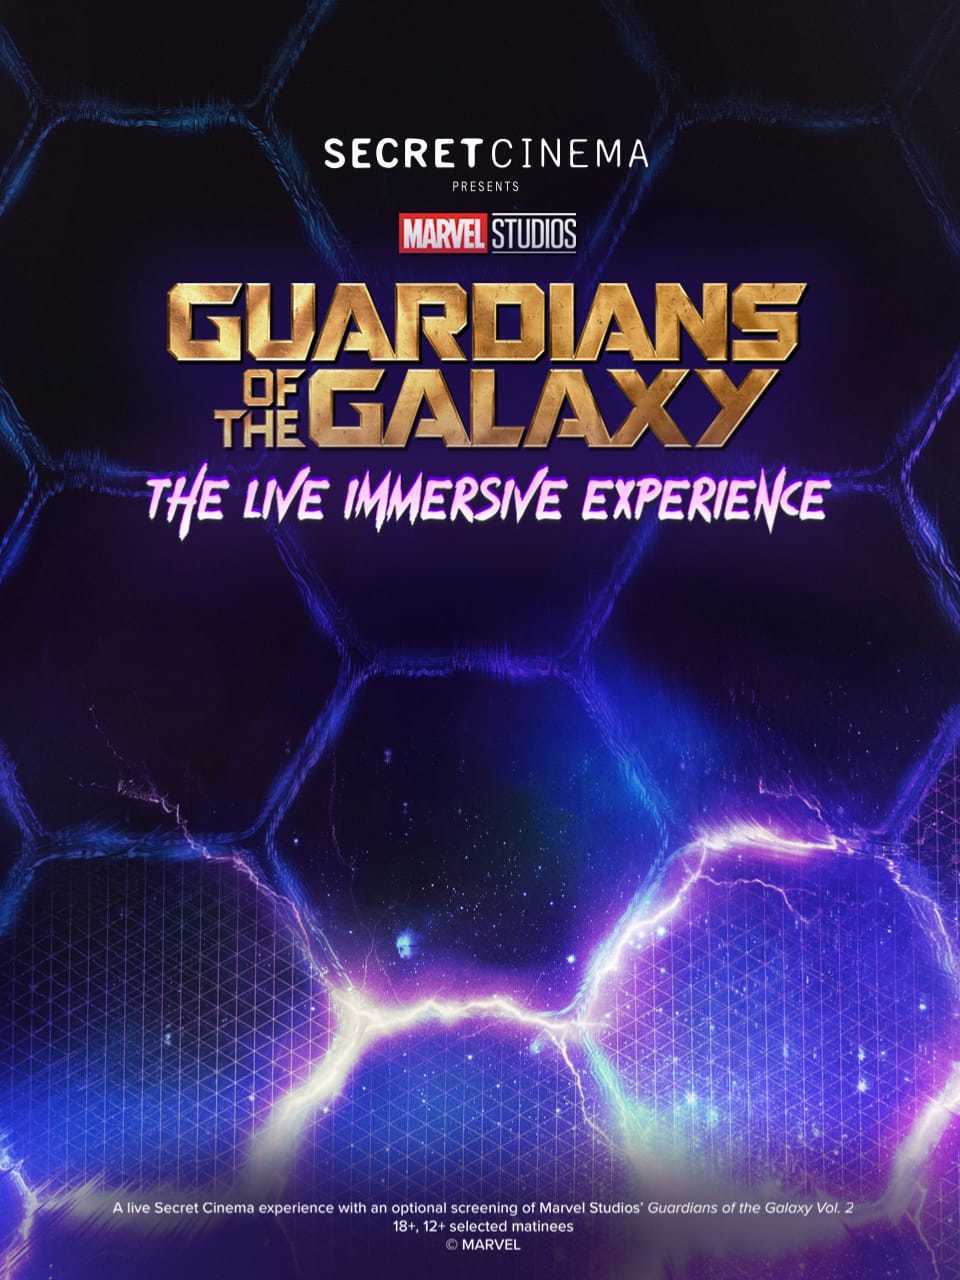 Secret Cinema: Guardians of the Galaxy poster with galactic details.